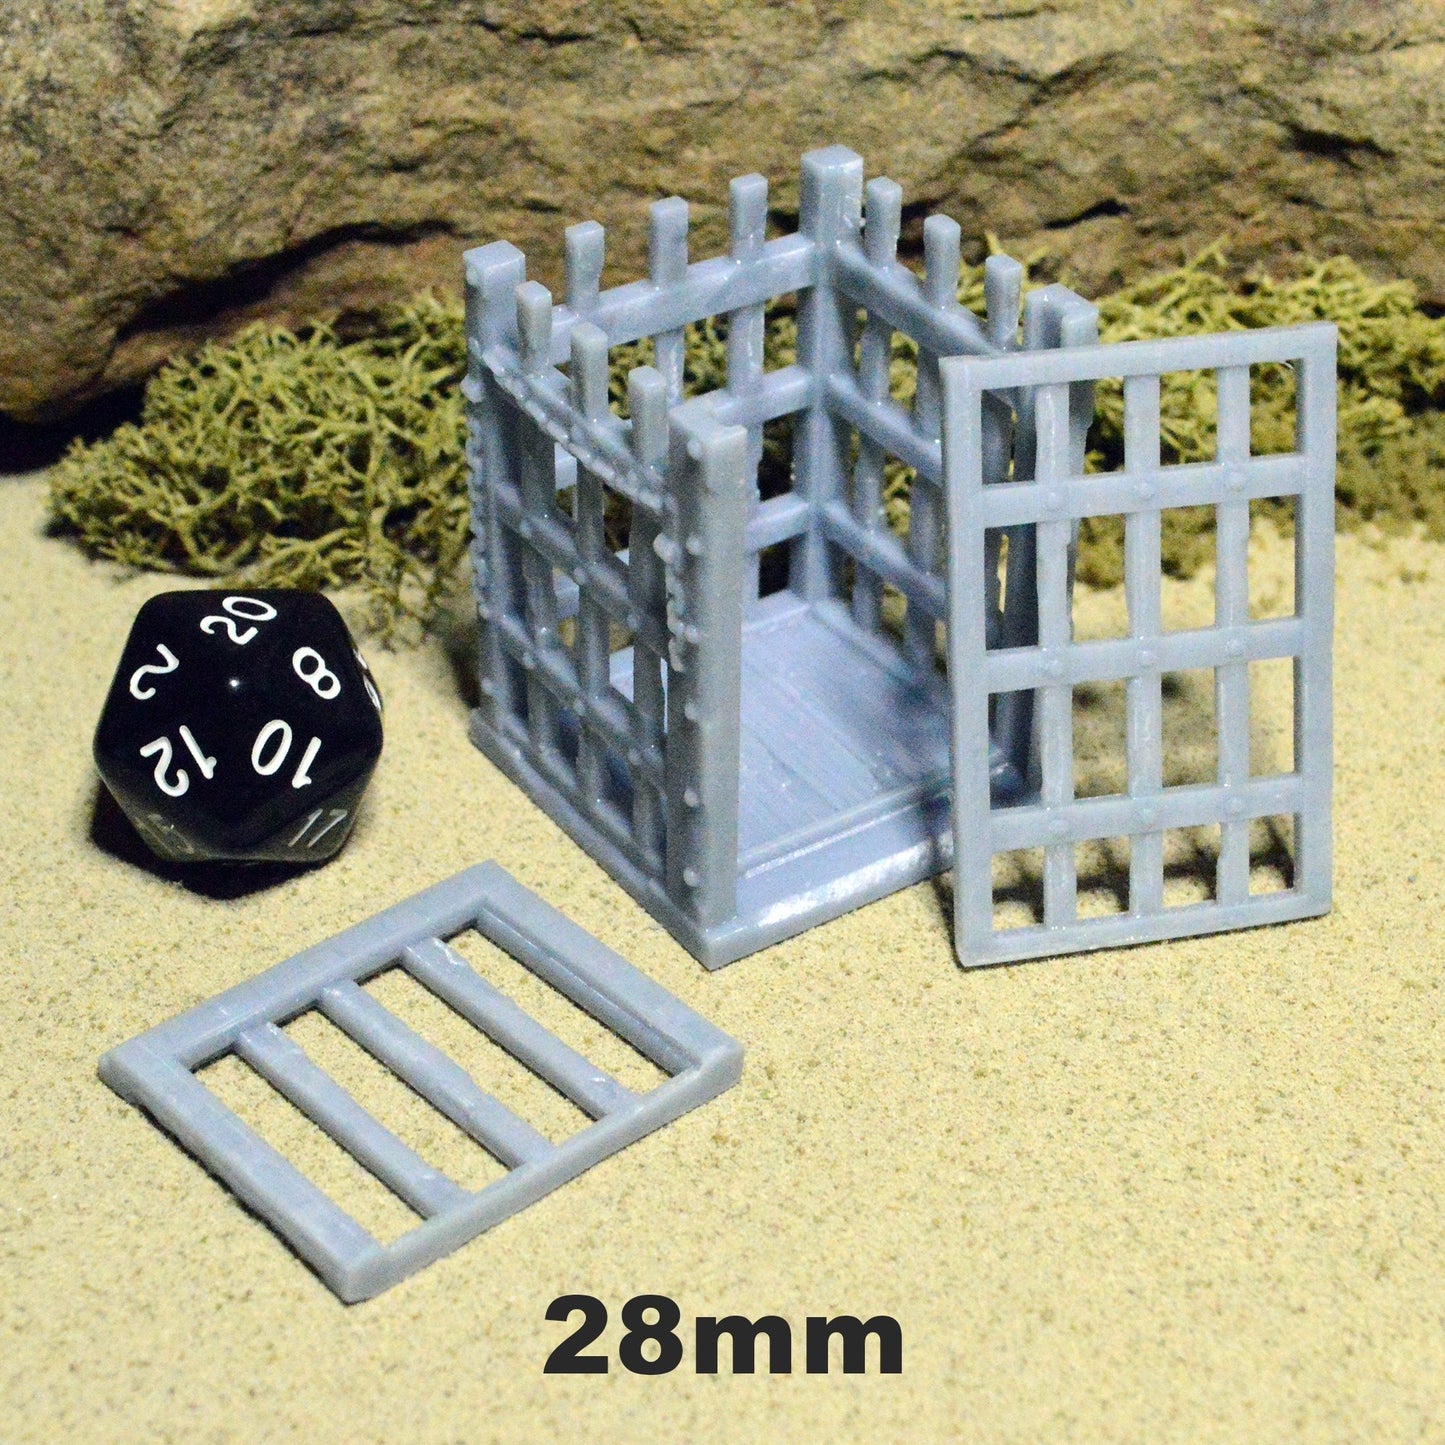 Miniature Iron Cage 28mm 32mm 42mm 50mm for D&D Terrain, DnD Pathfinder Fighting Pit Pirate Bandit Cage